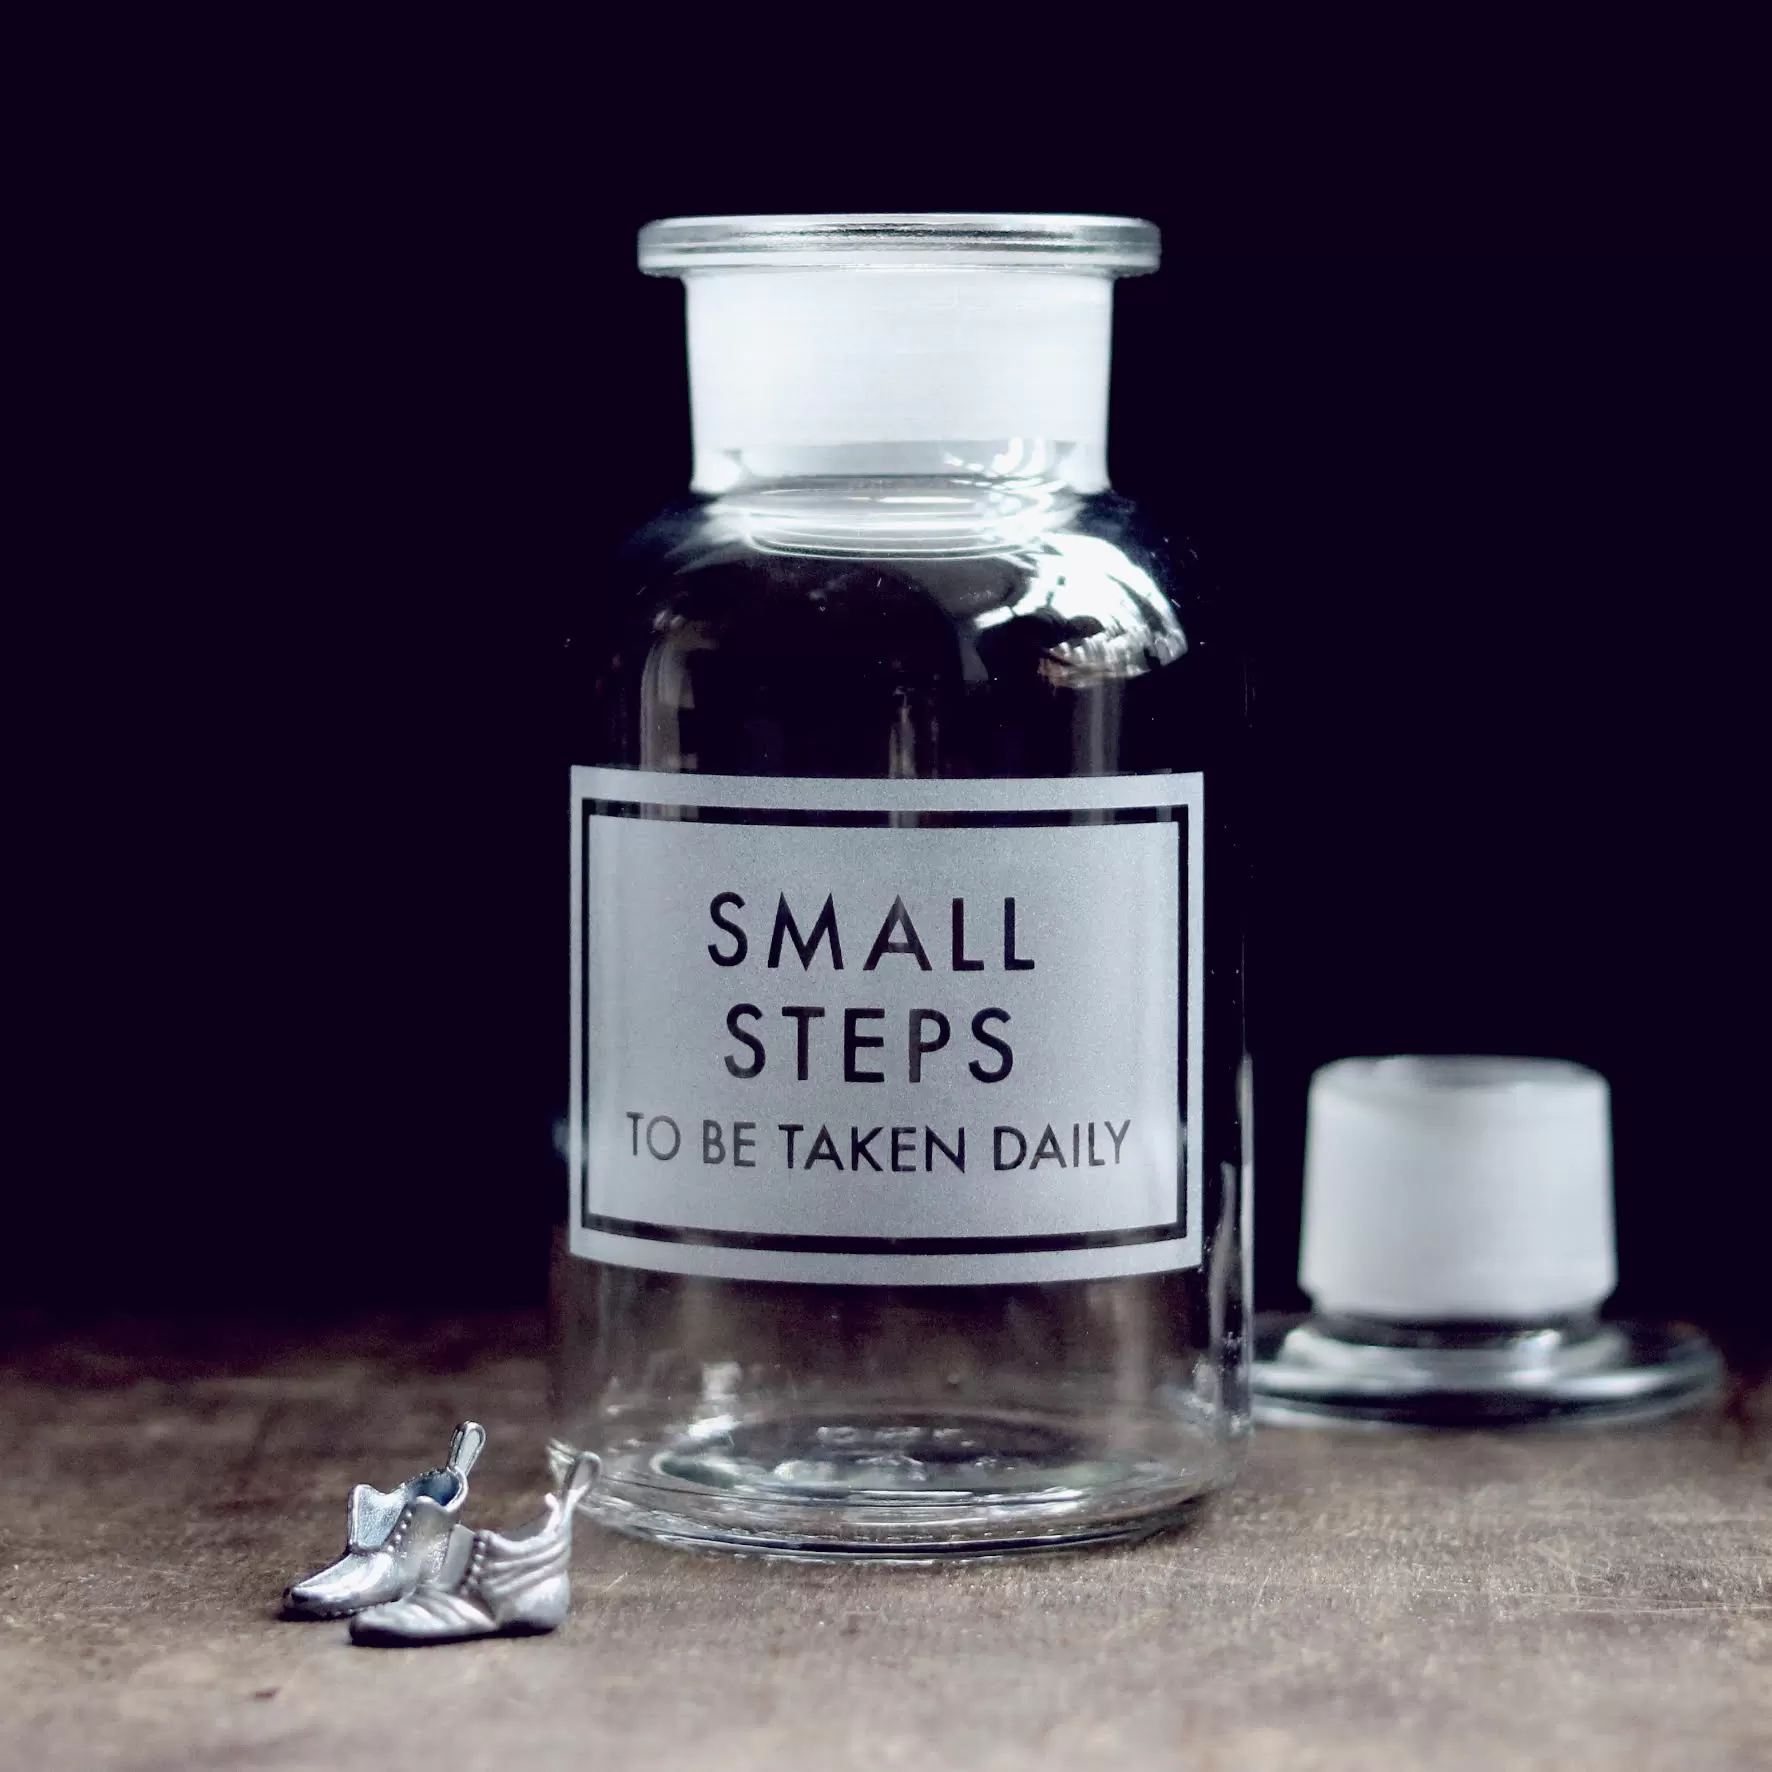 'Small steps' apothecary bottle, by Vinegar & Brown Paper